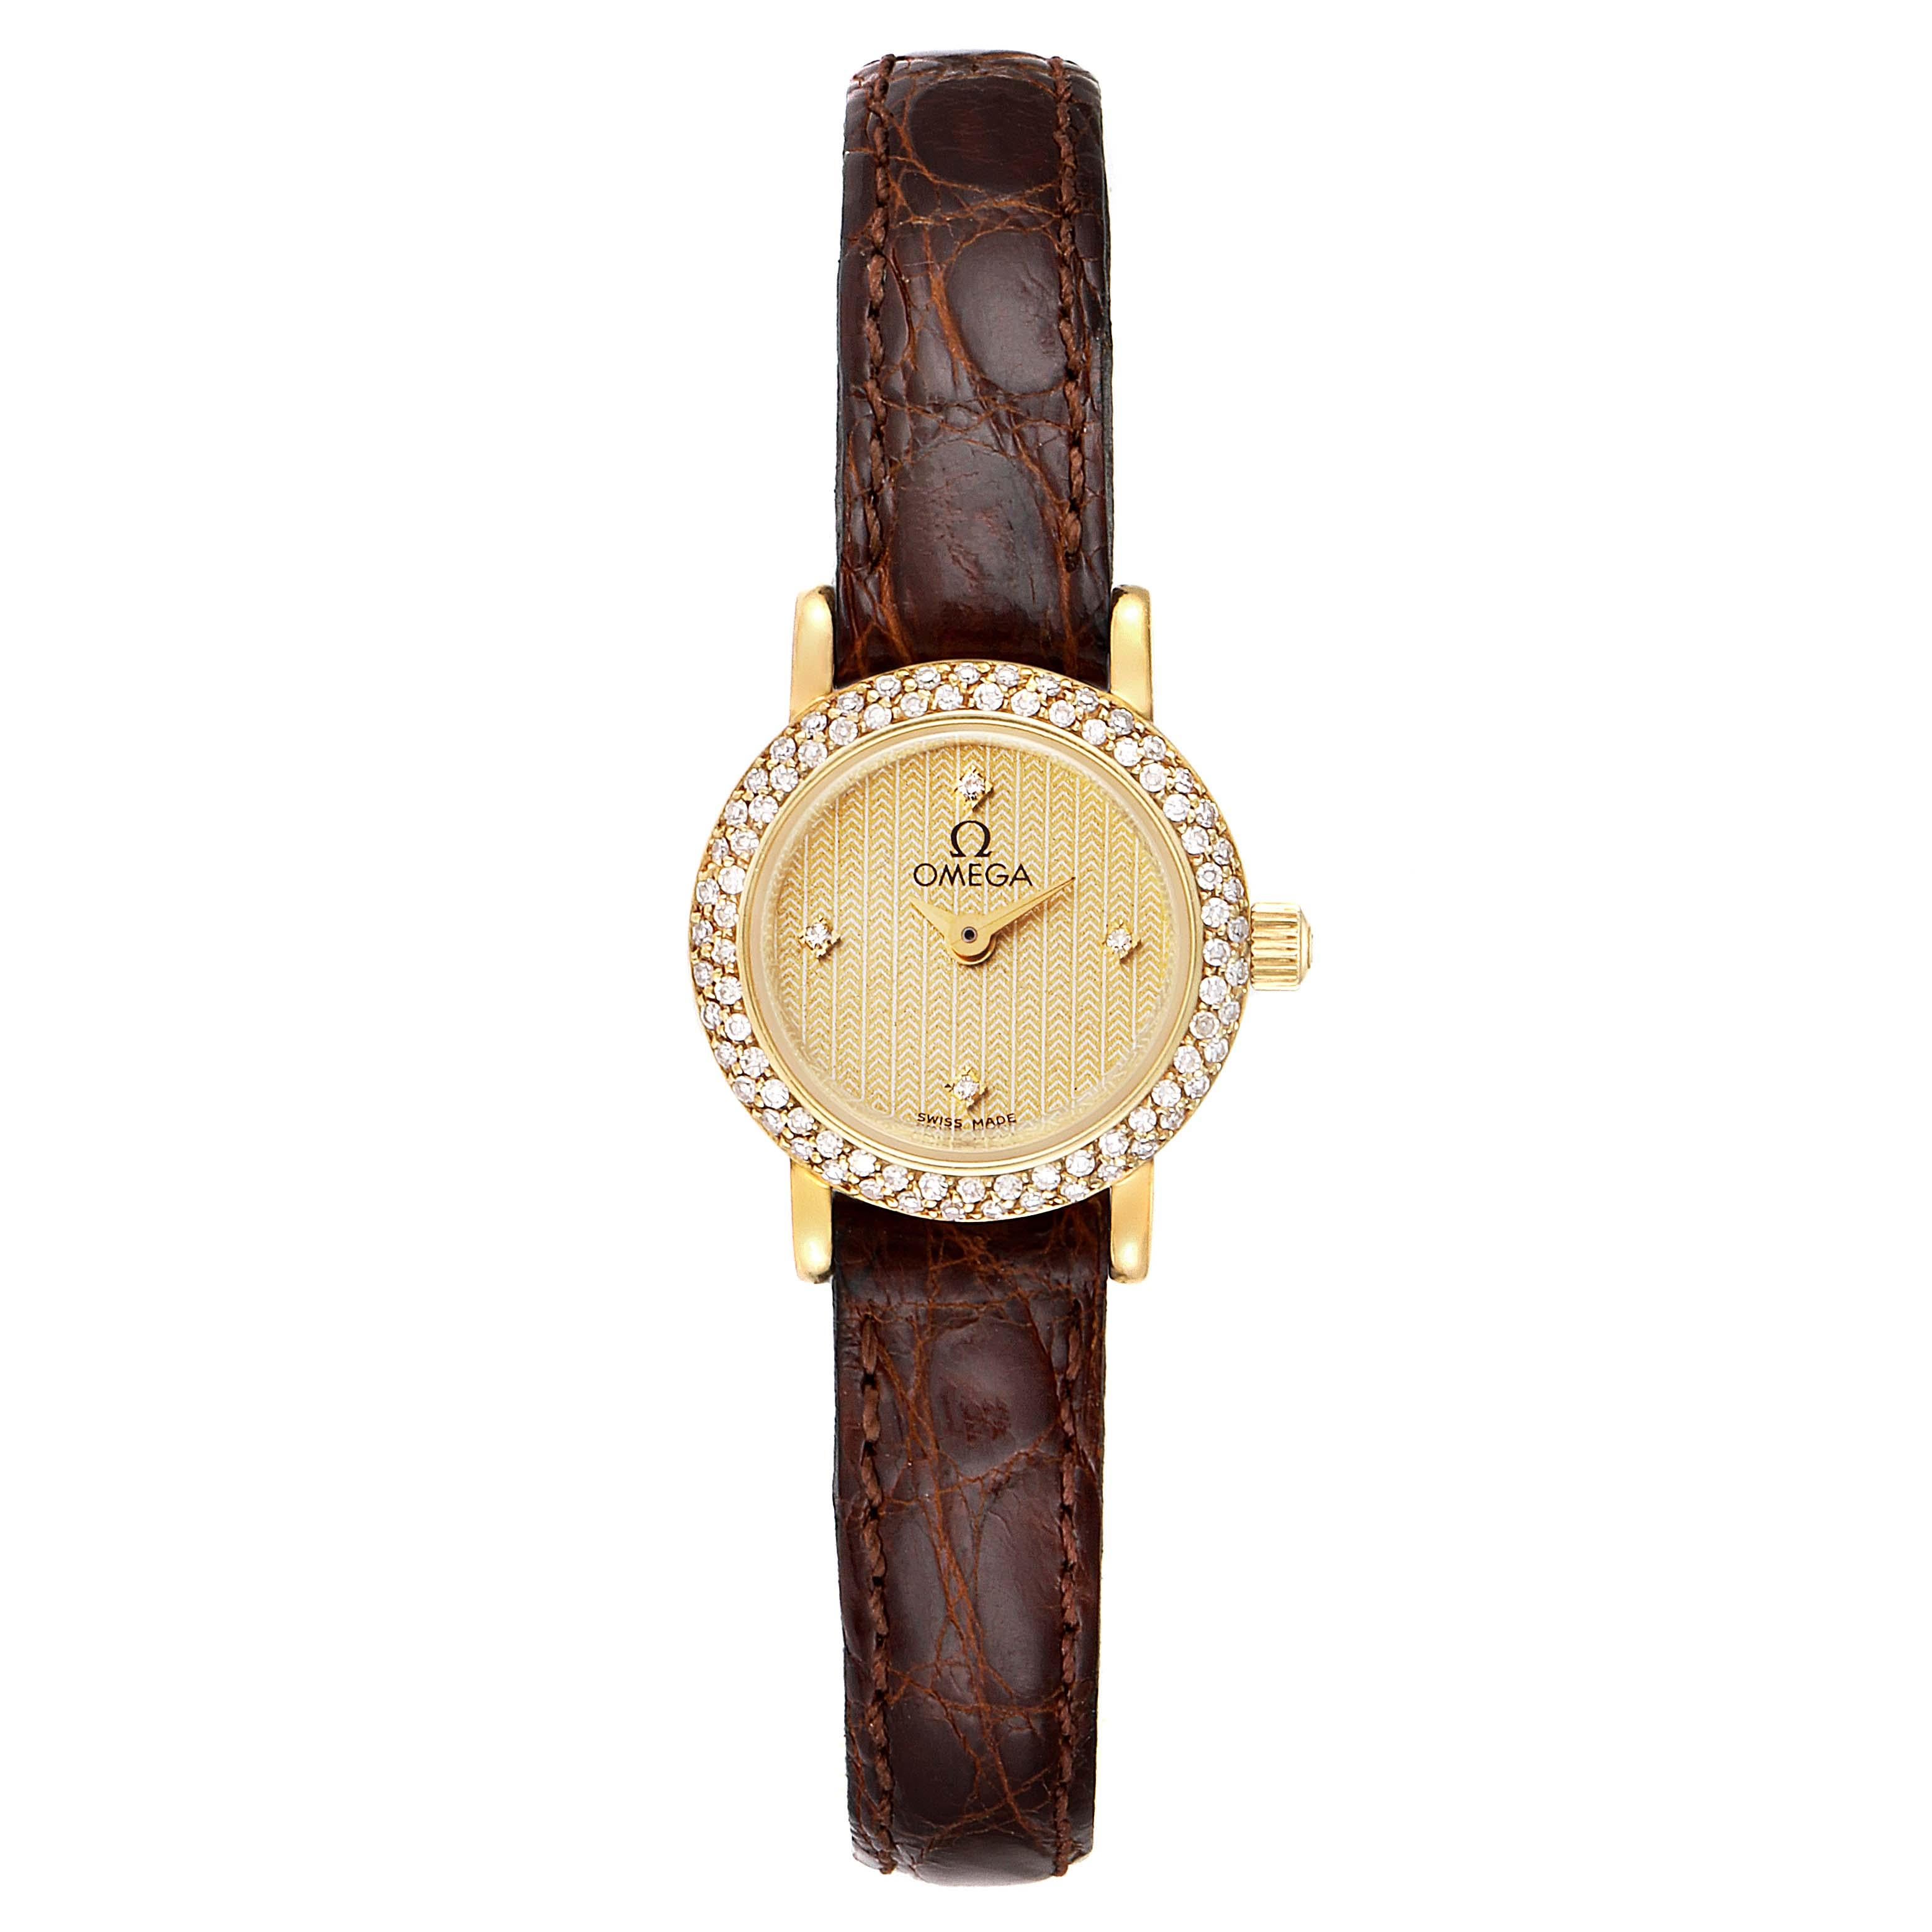 Omega DeVille Mini Yellow Gold Diamond Cocktail Ladies Watch 1450. Quartz movement. Yellow gold round case 18.5 mm in diameter. Yellow gold diamond bezel. Scratch-resistant sapphire crystal. Champagne dial with diamond hour markers. Brown leather